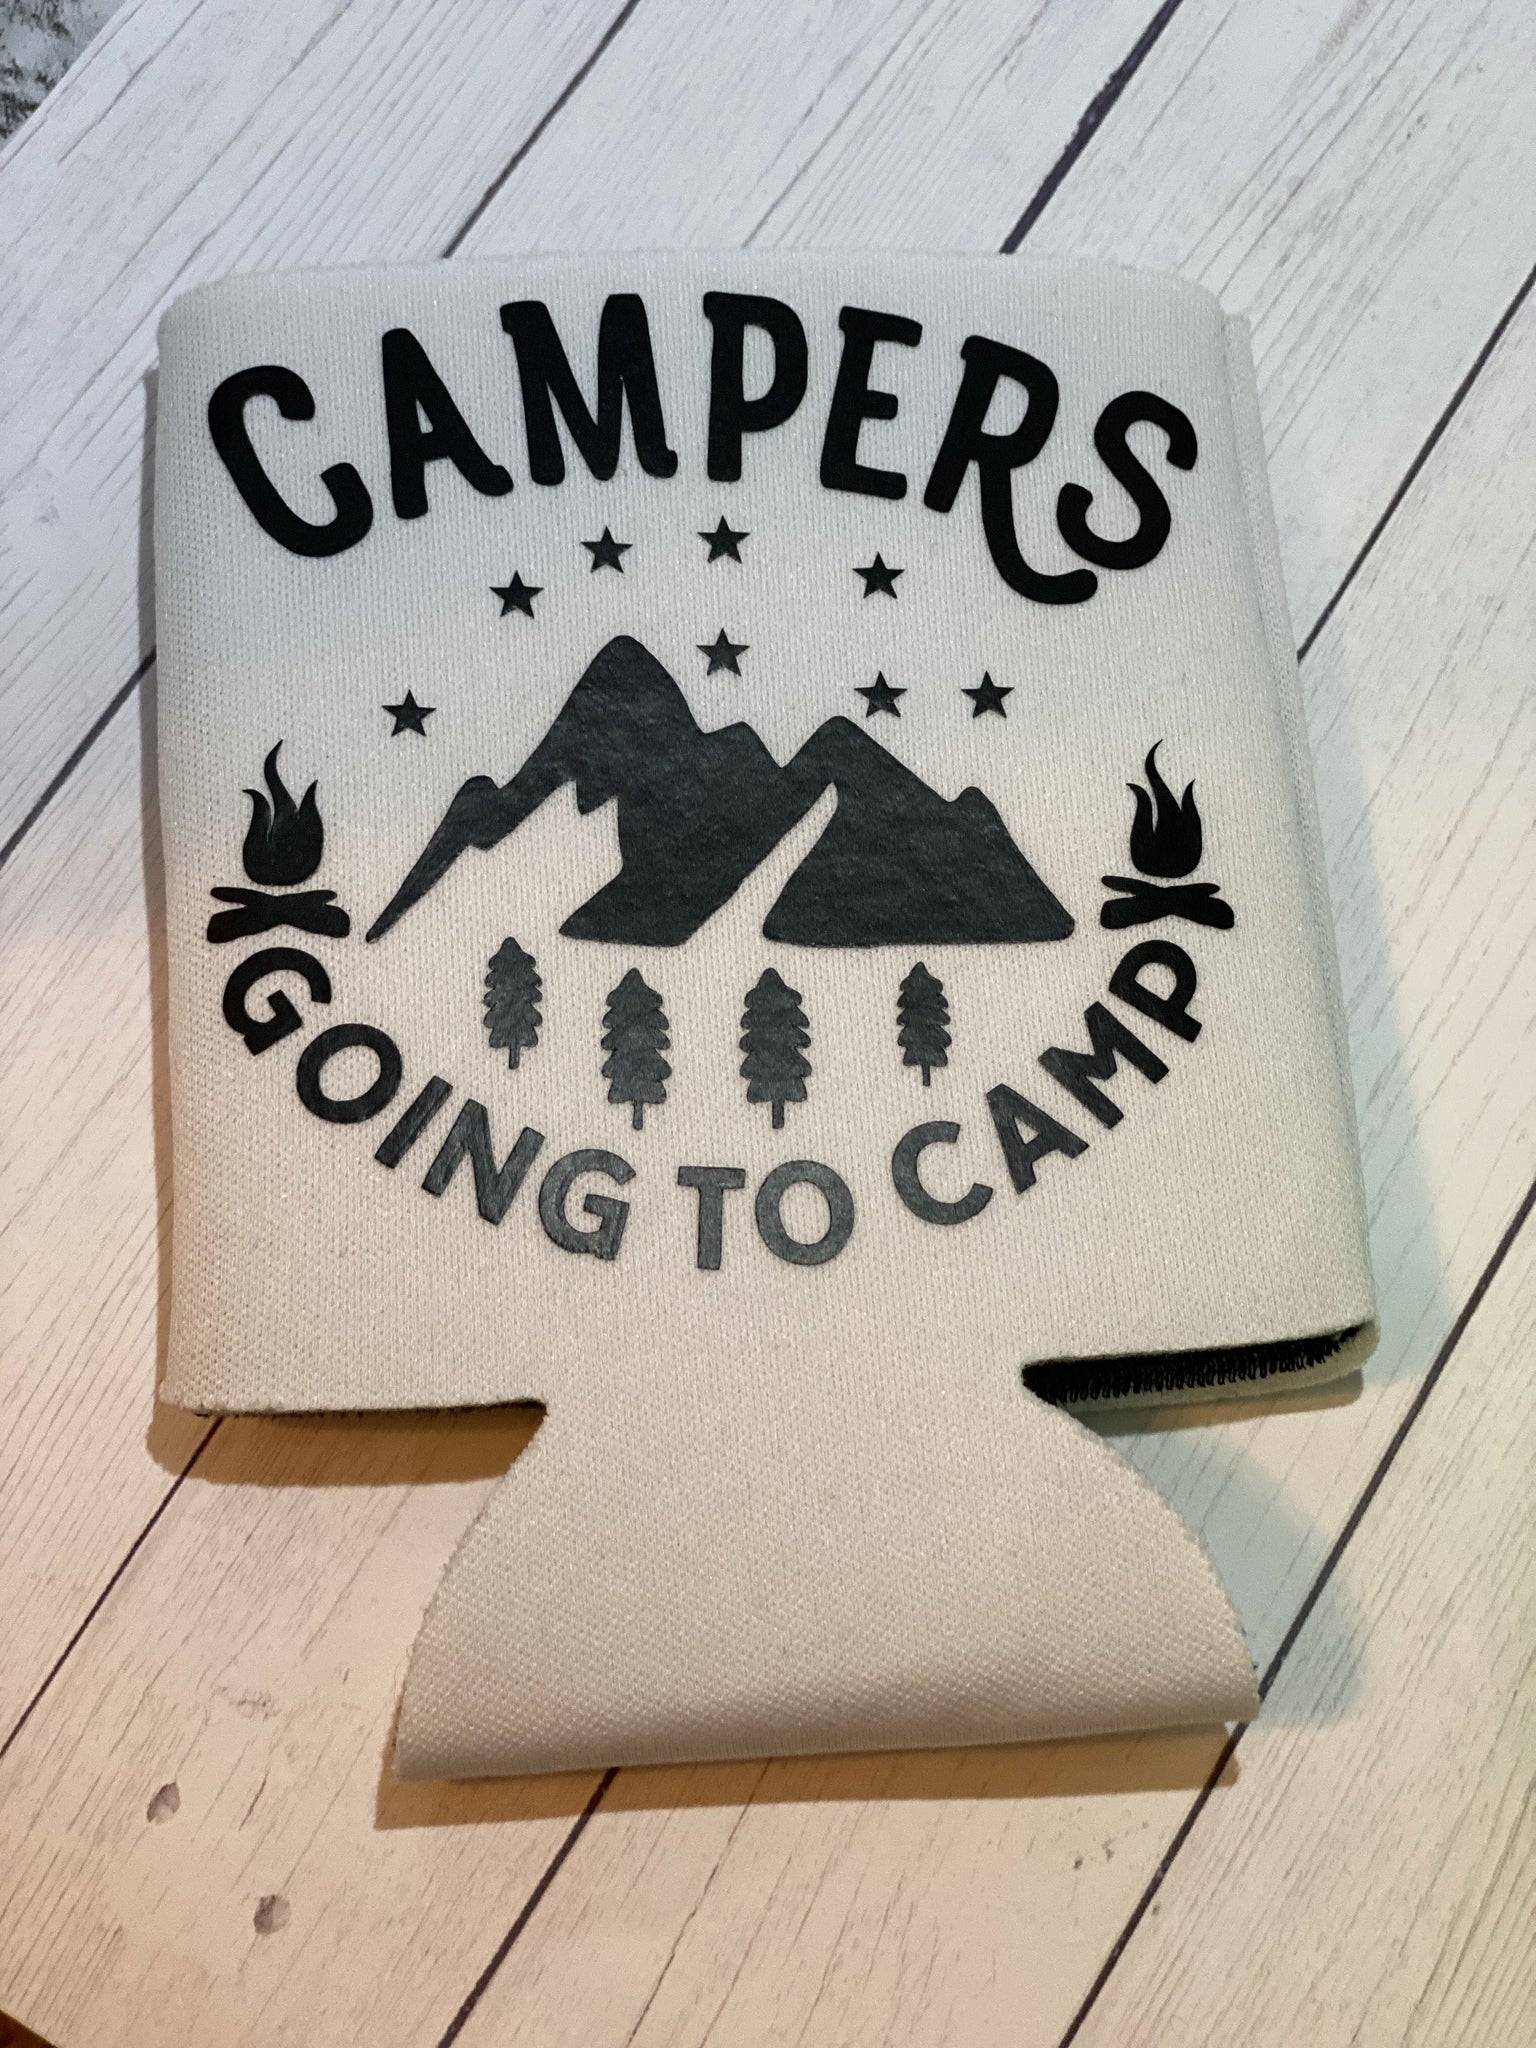 Campers Going to Camp White Standard Koozie